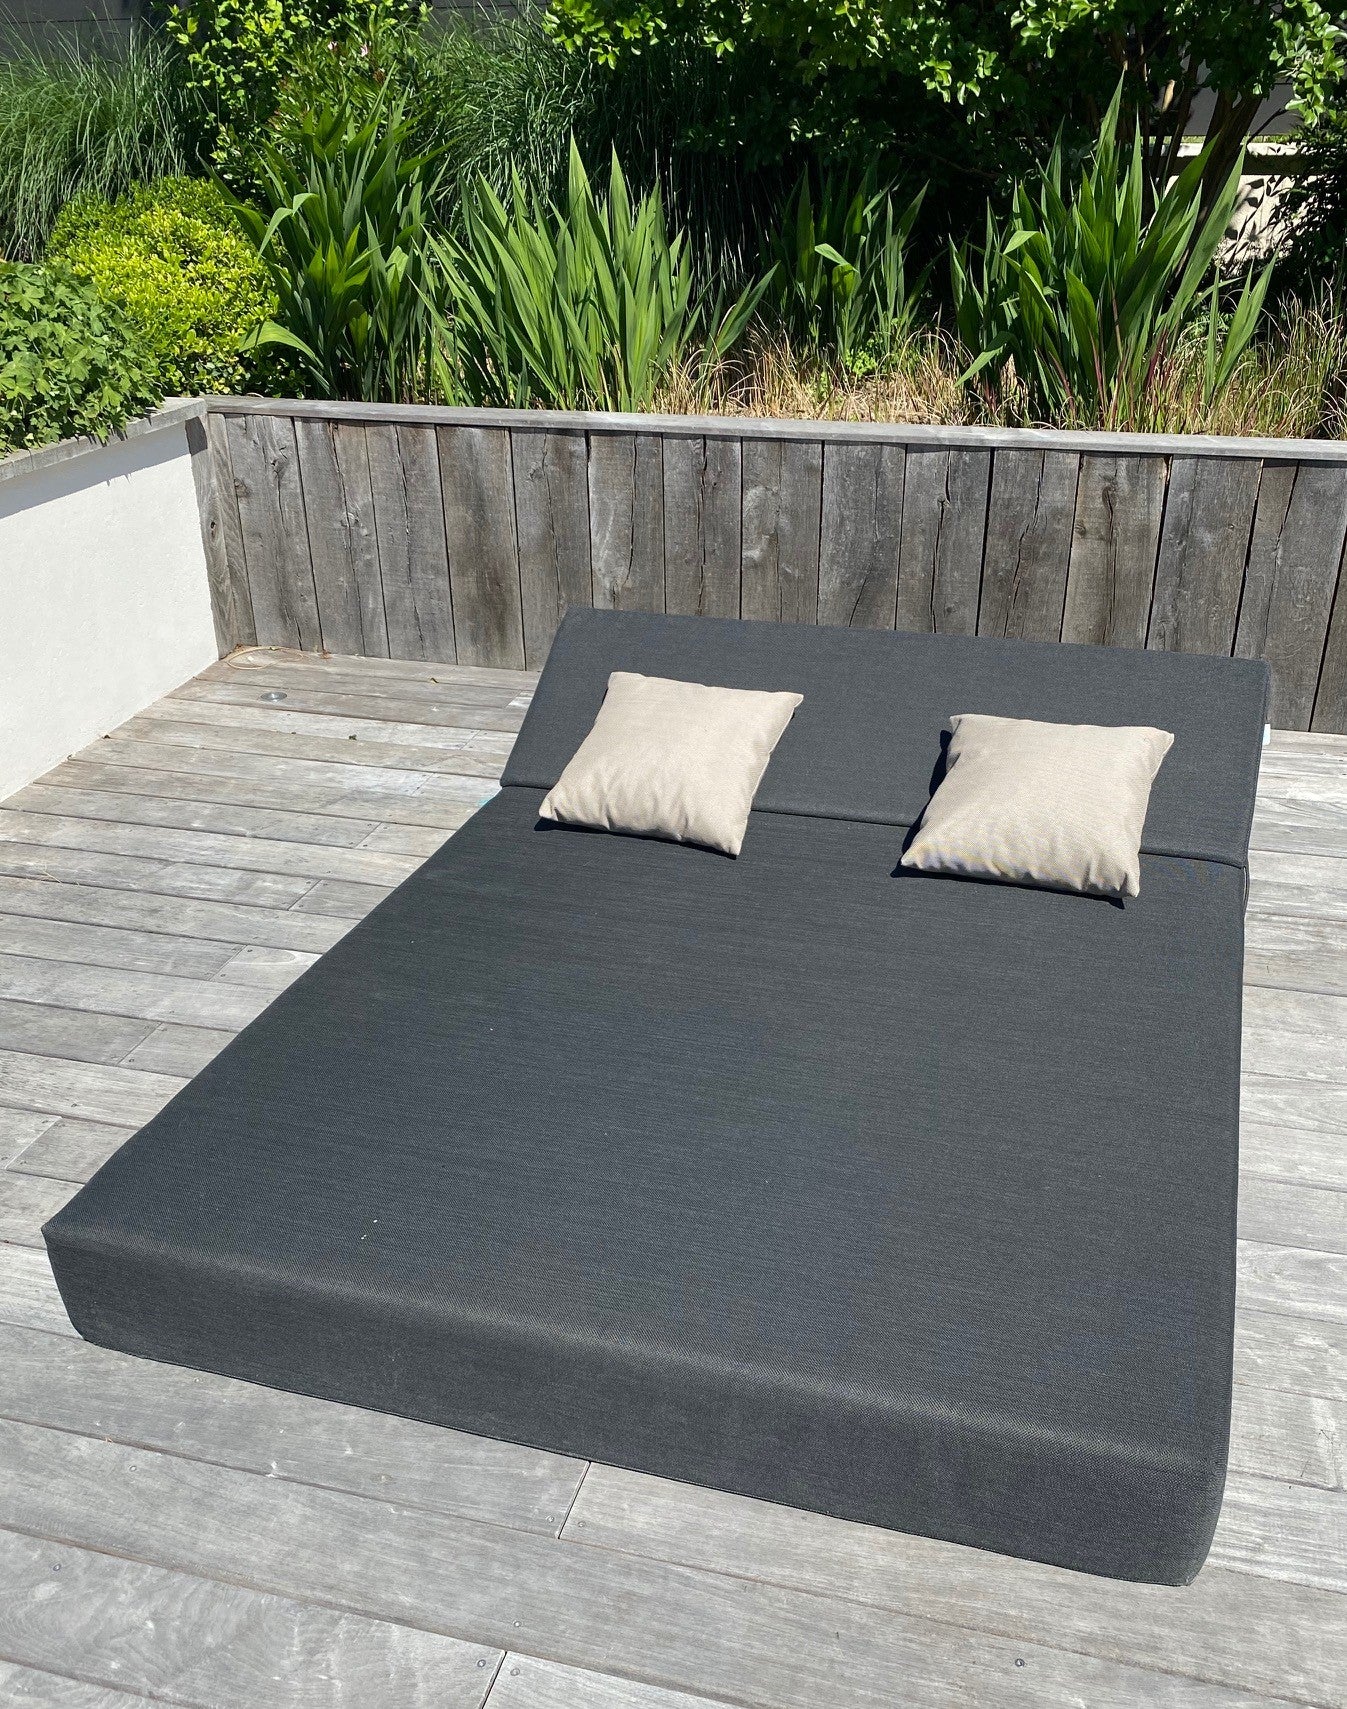 DOUBLE BED JUNG | Beach Bed and Pool | 180x140xh20 cm